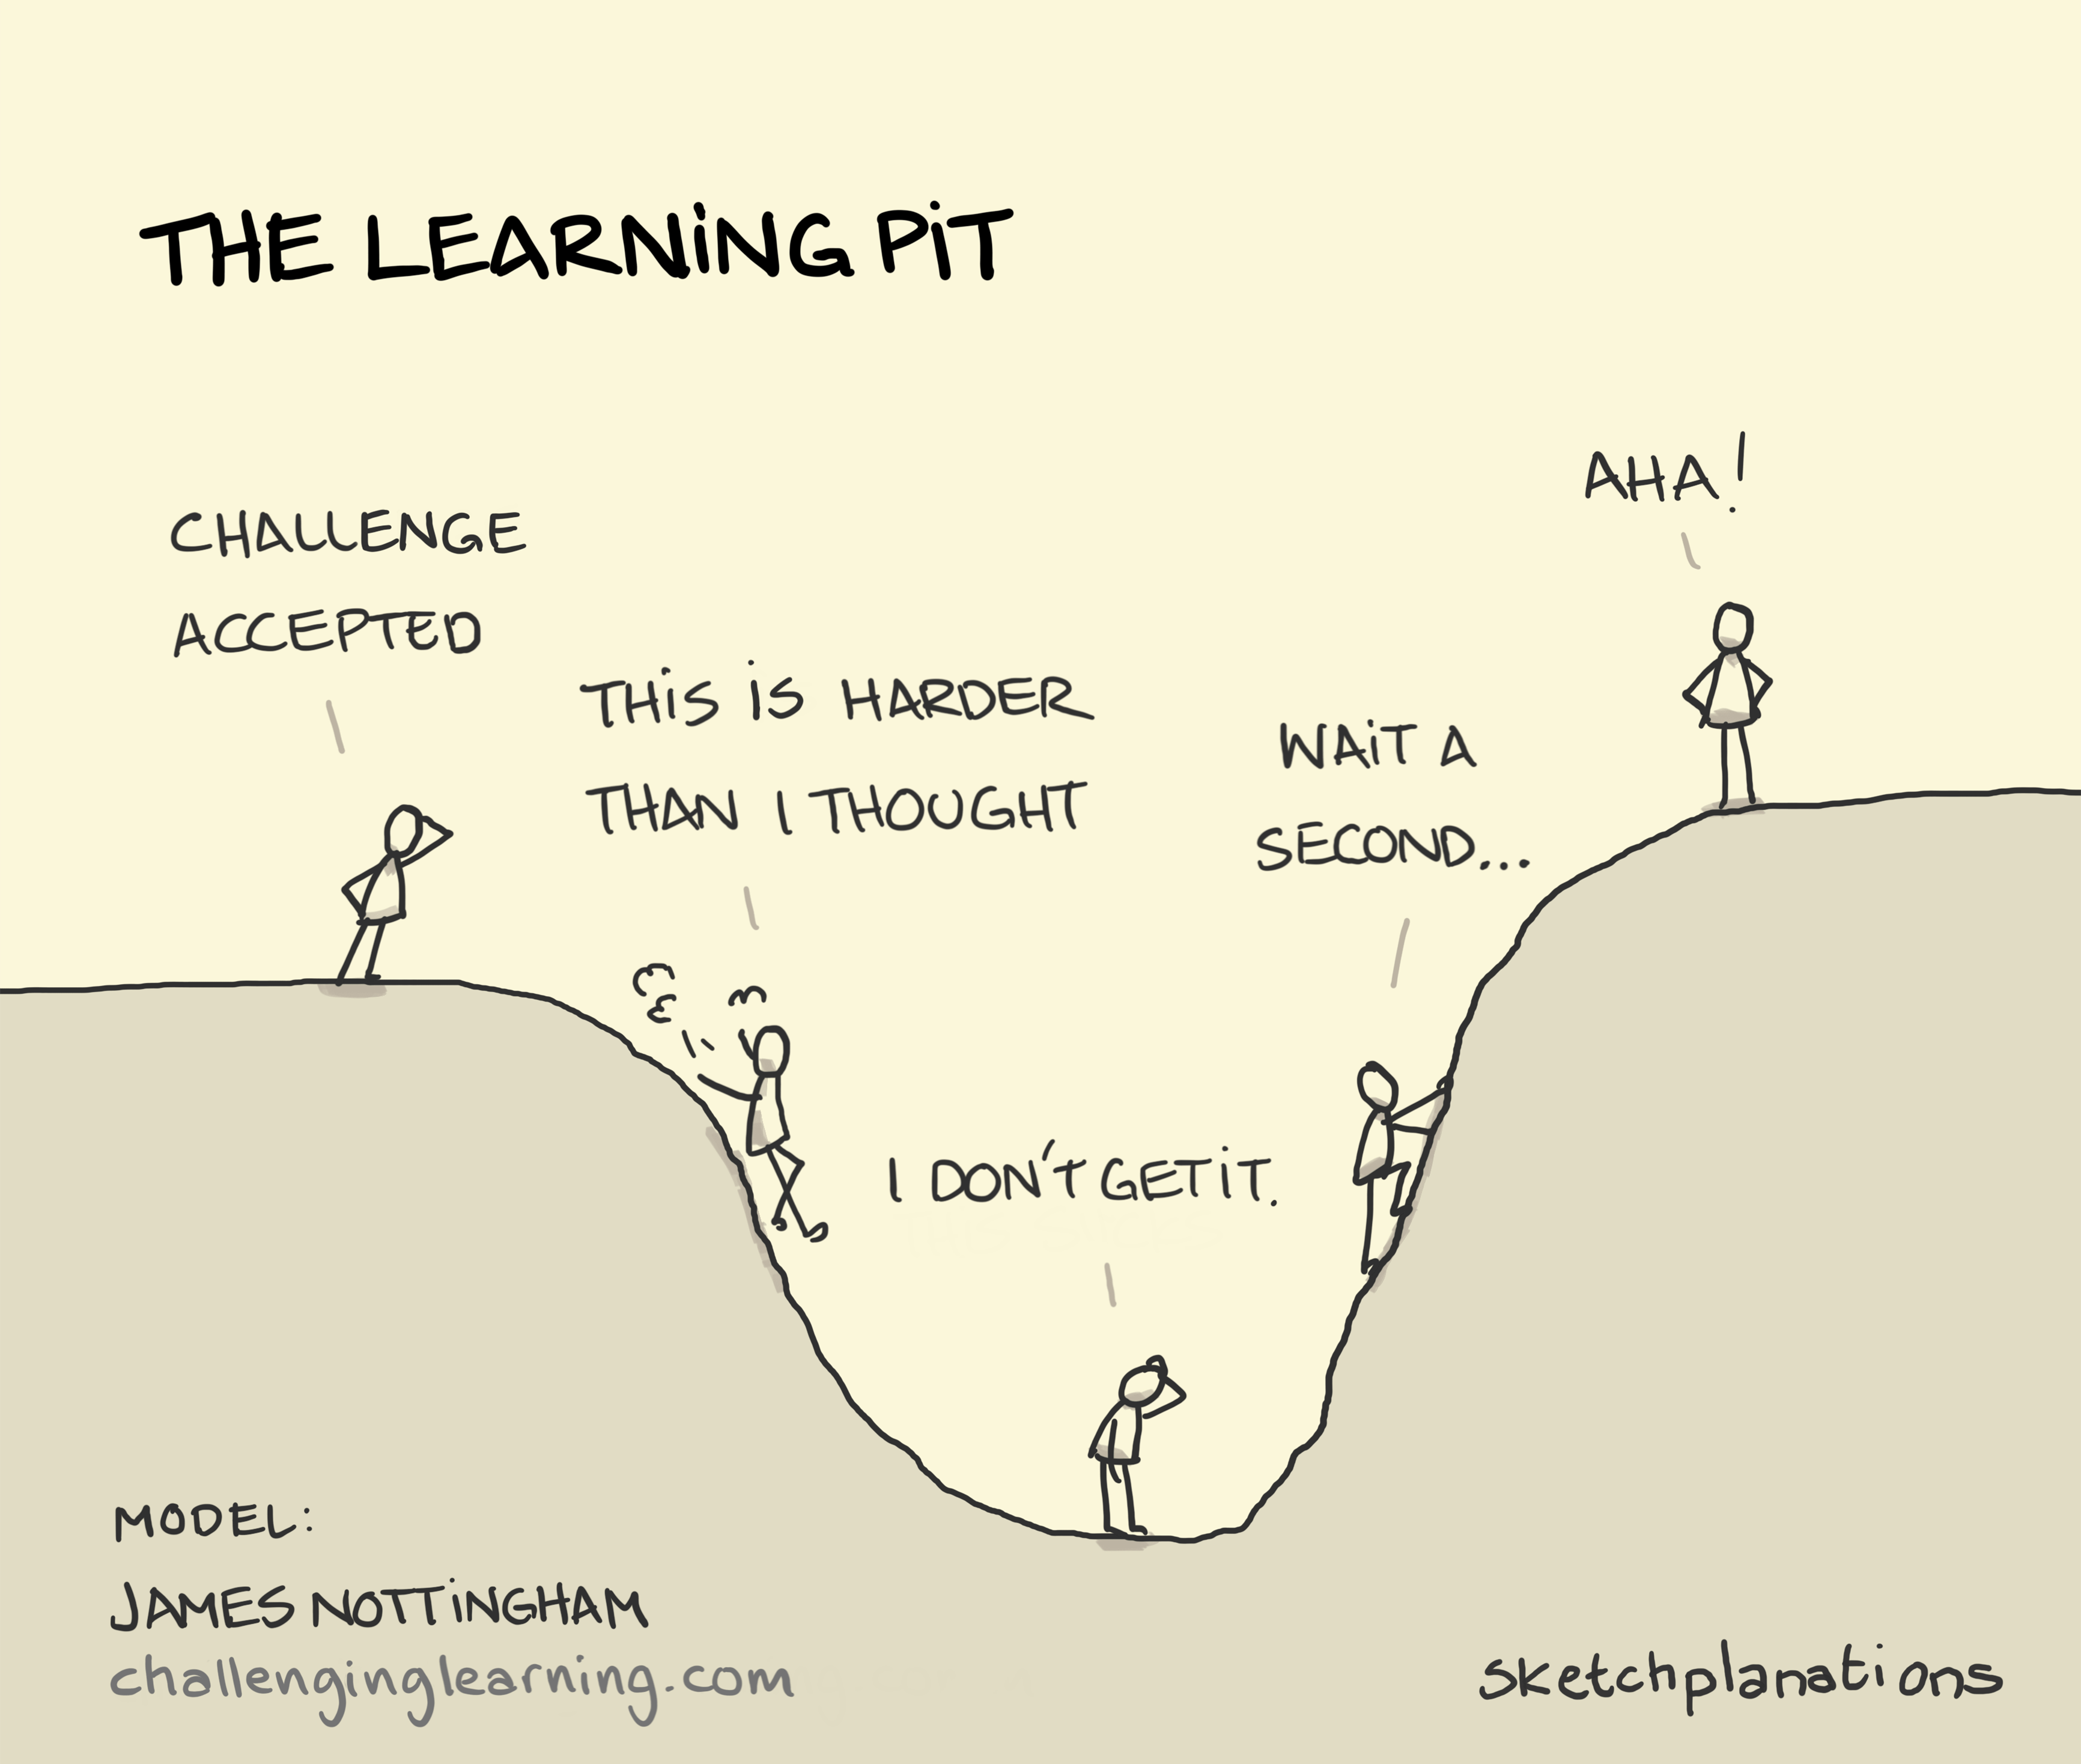 The Learning Pit illustration: a journey from left to right; an individual faces a learning challenge represented by a large pit they need to reach the other side of. Having fallen down into the pit, the challenge seems more difficult than first anticipated. As the picture becomes clearer they discover what they need to climb up the other side to a point where they can look back down at the pit having mastered the challenge. 